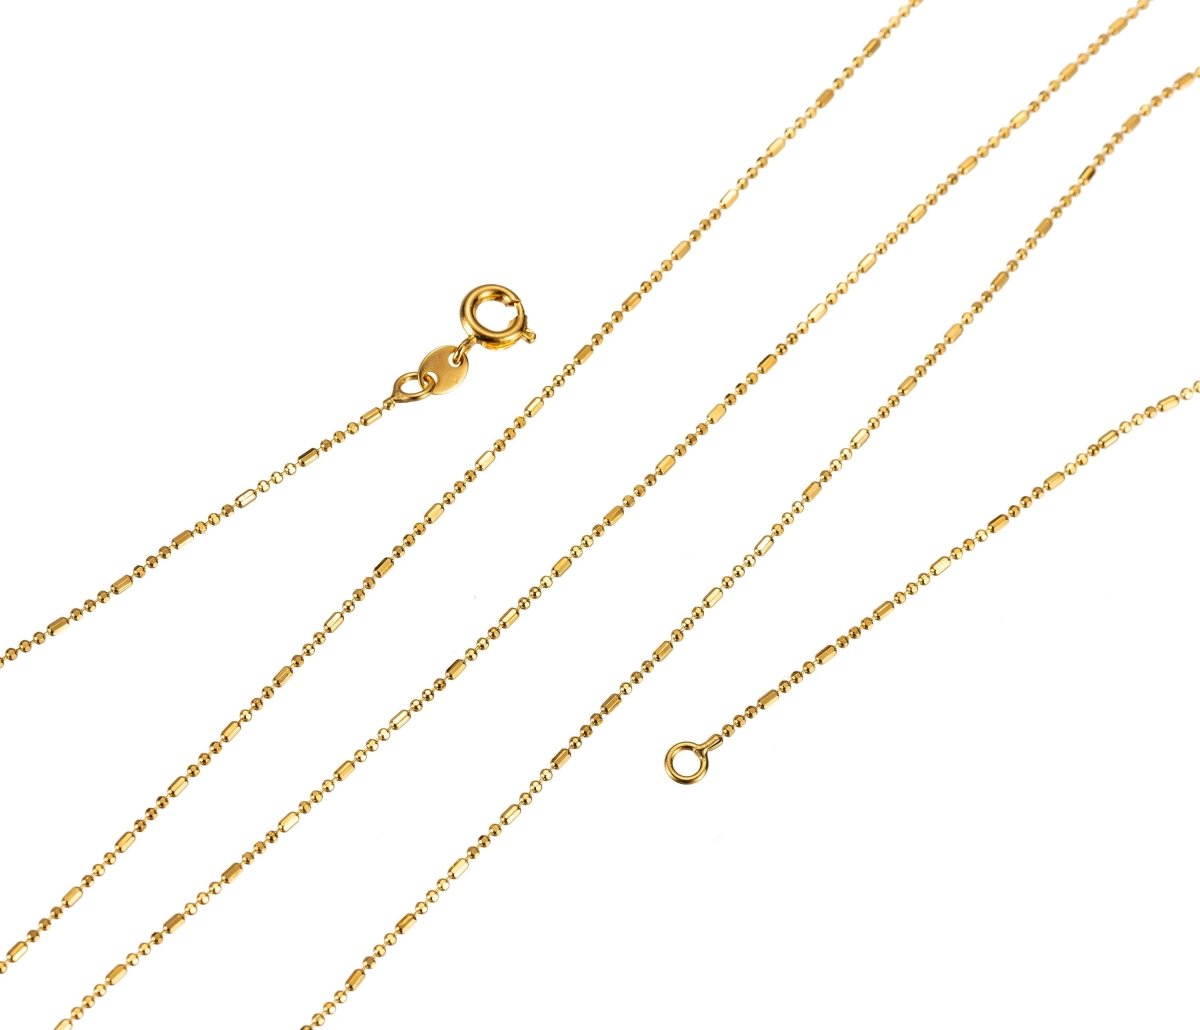 24K Gold Plated Bead Necklace - Dainty 0.8mm, 1mm Bead Chain - 13.7, 19.6 Inches Bead Necklace w/ Spring Ring | CN-484, CN-506 Clearance Pricing - DLUXCA